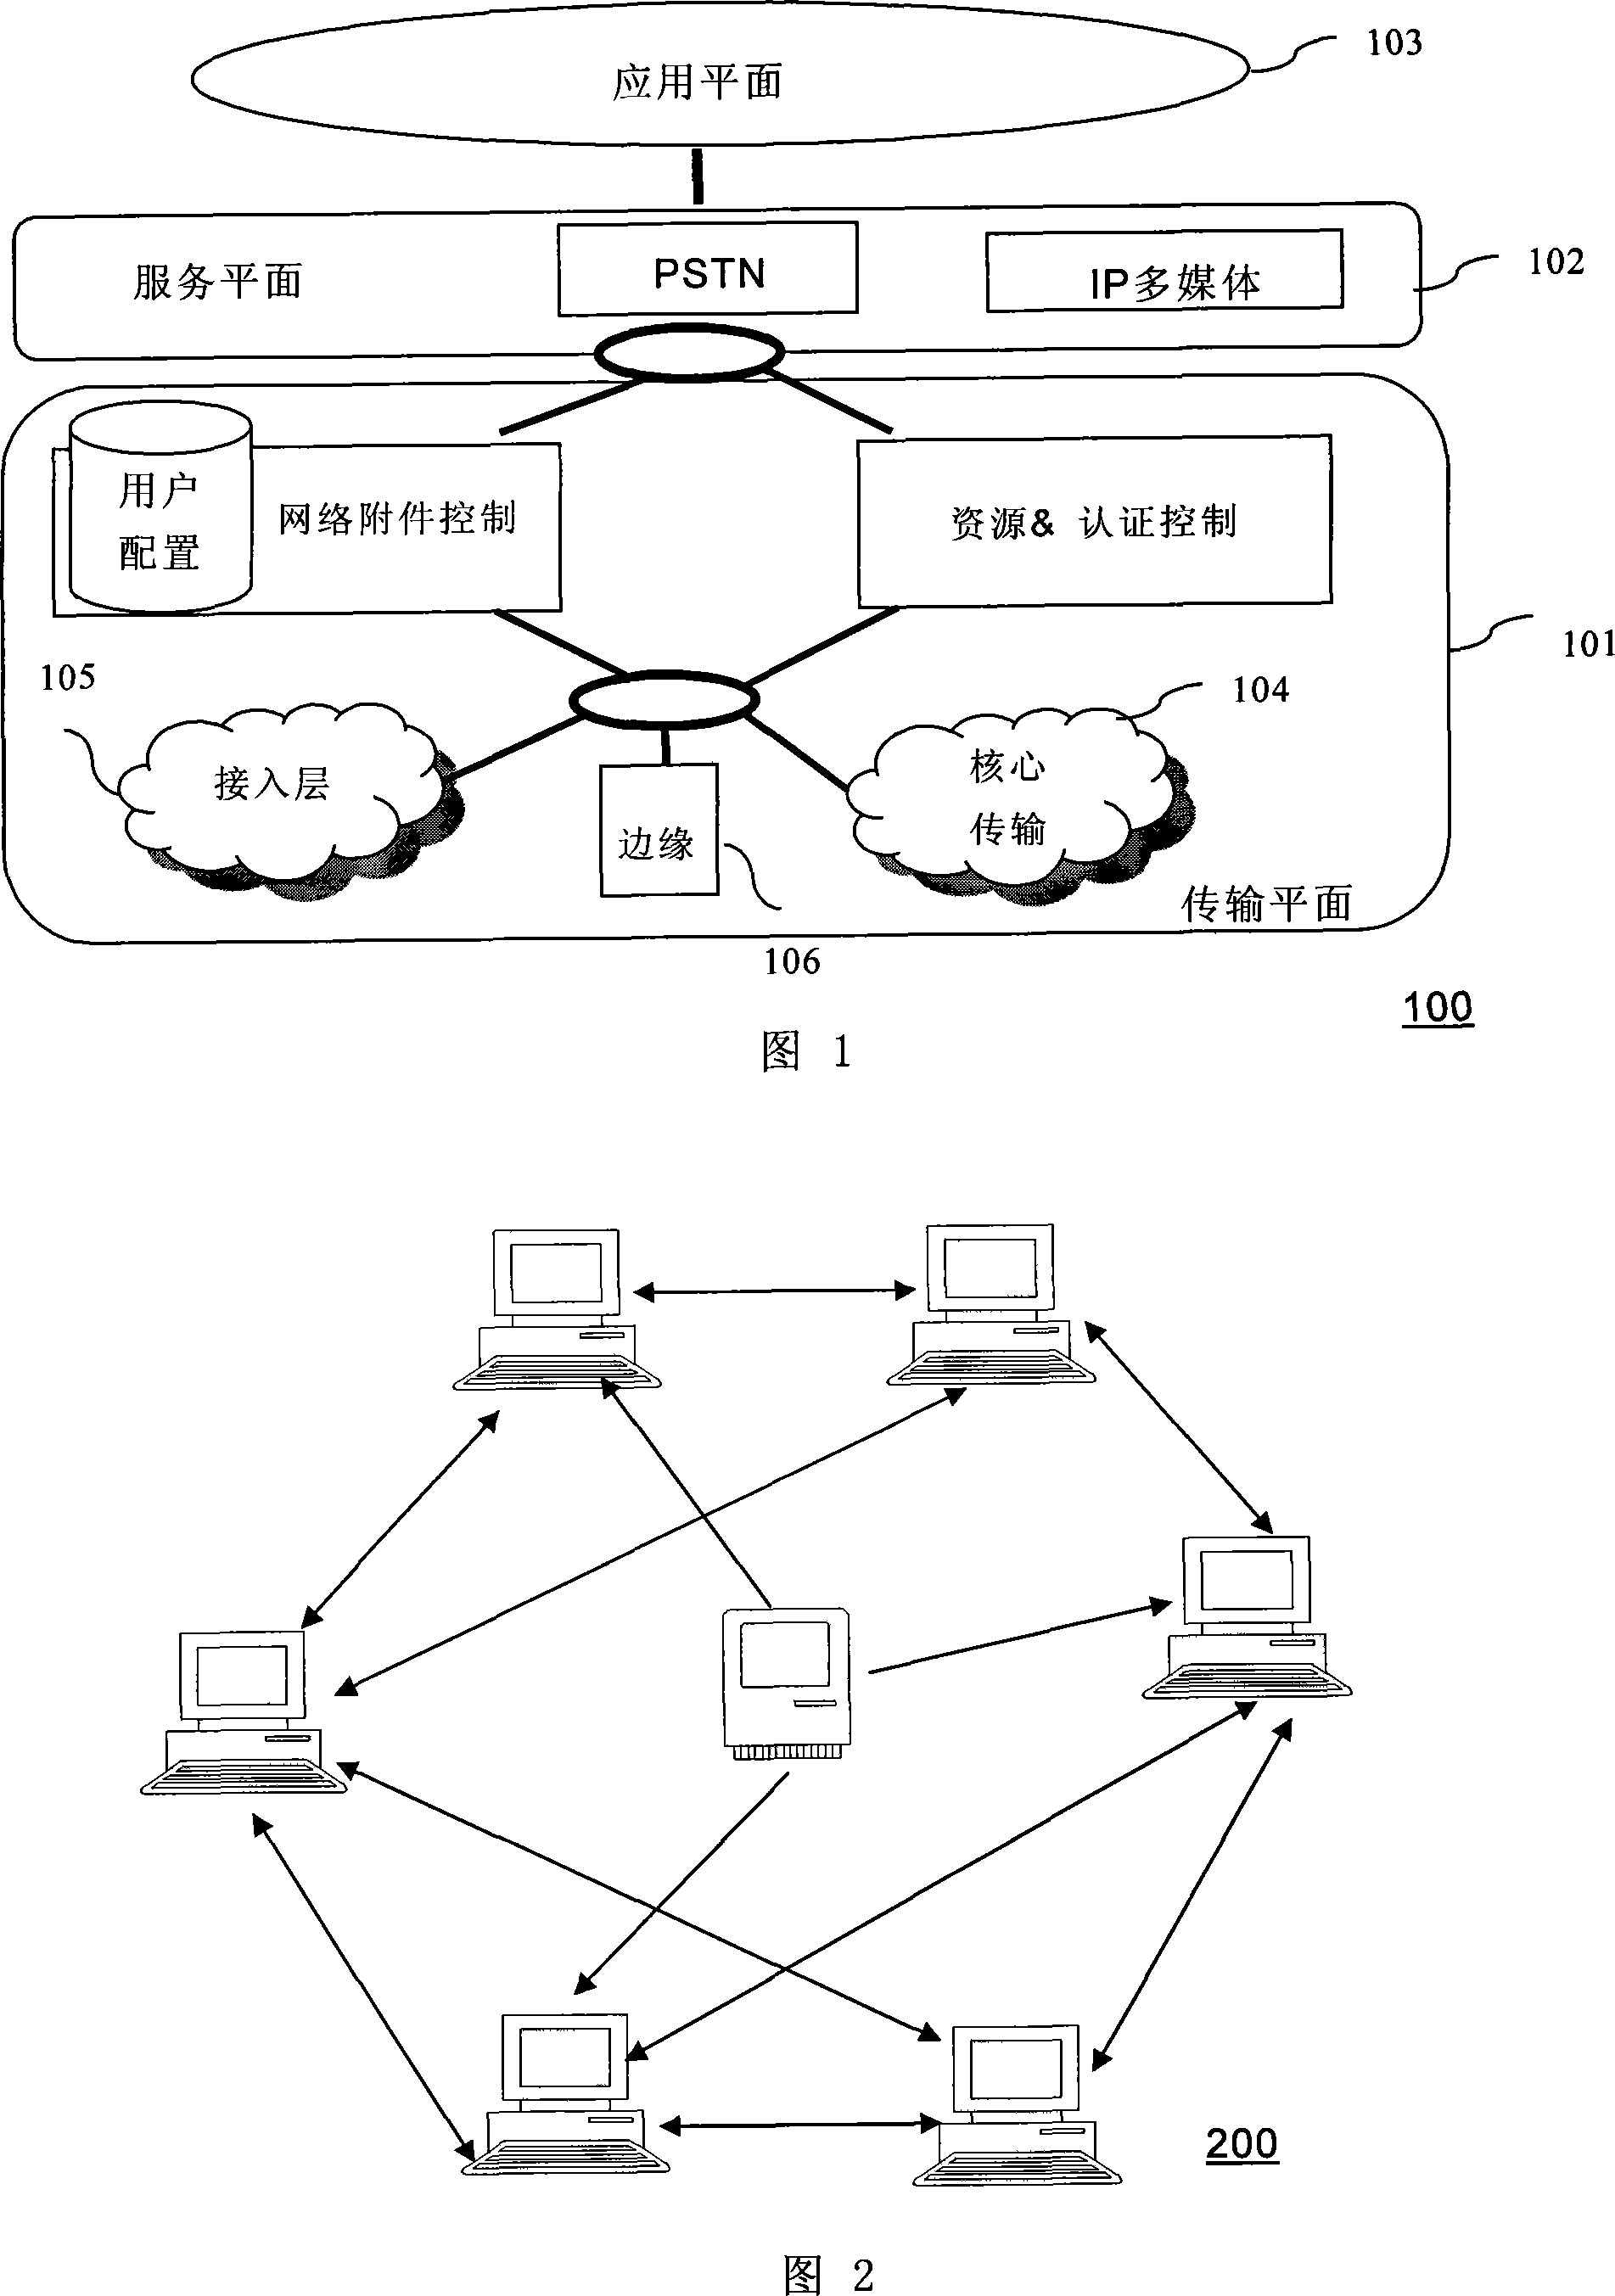 Accelerating method for asymmetric and multi-concurrency network